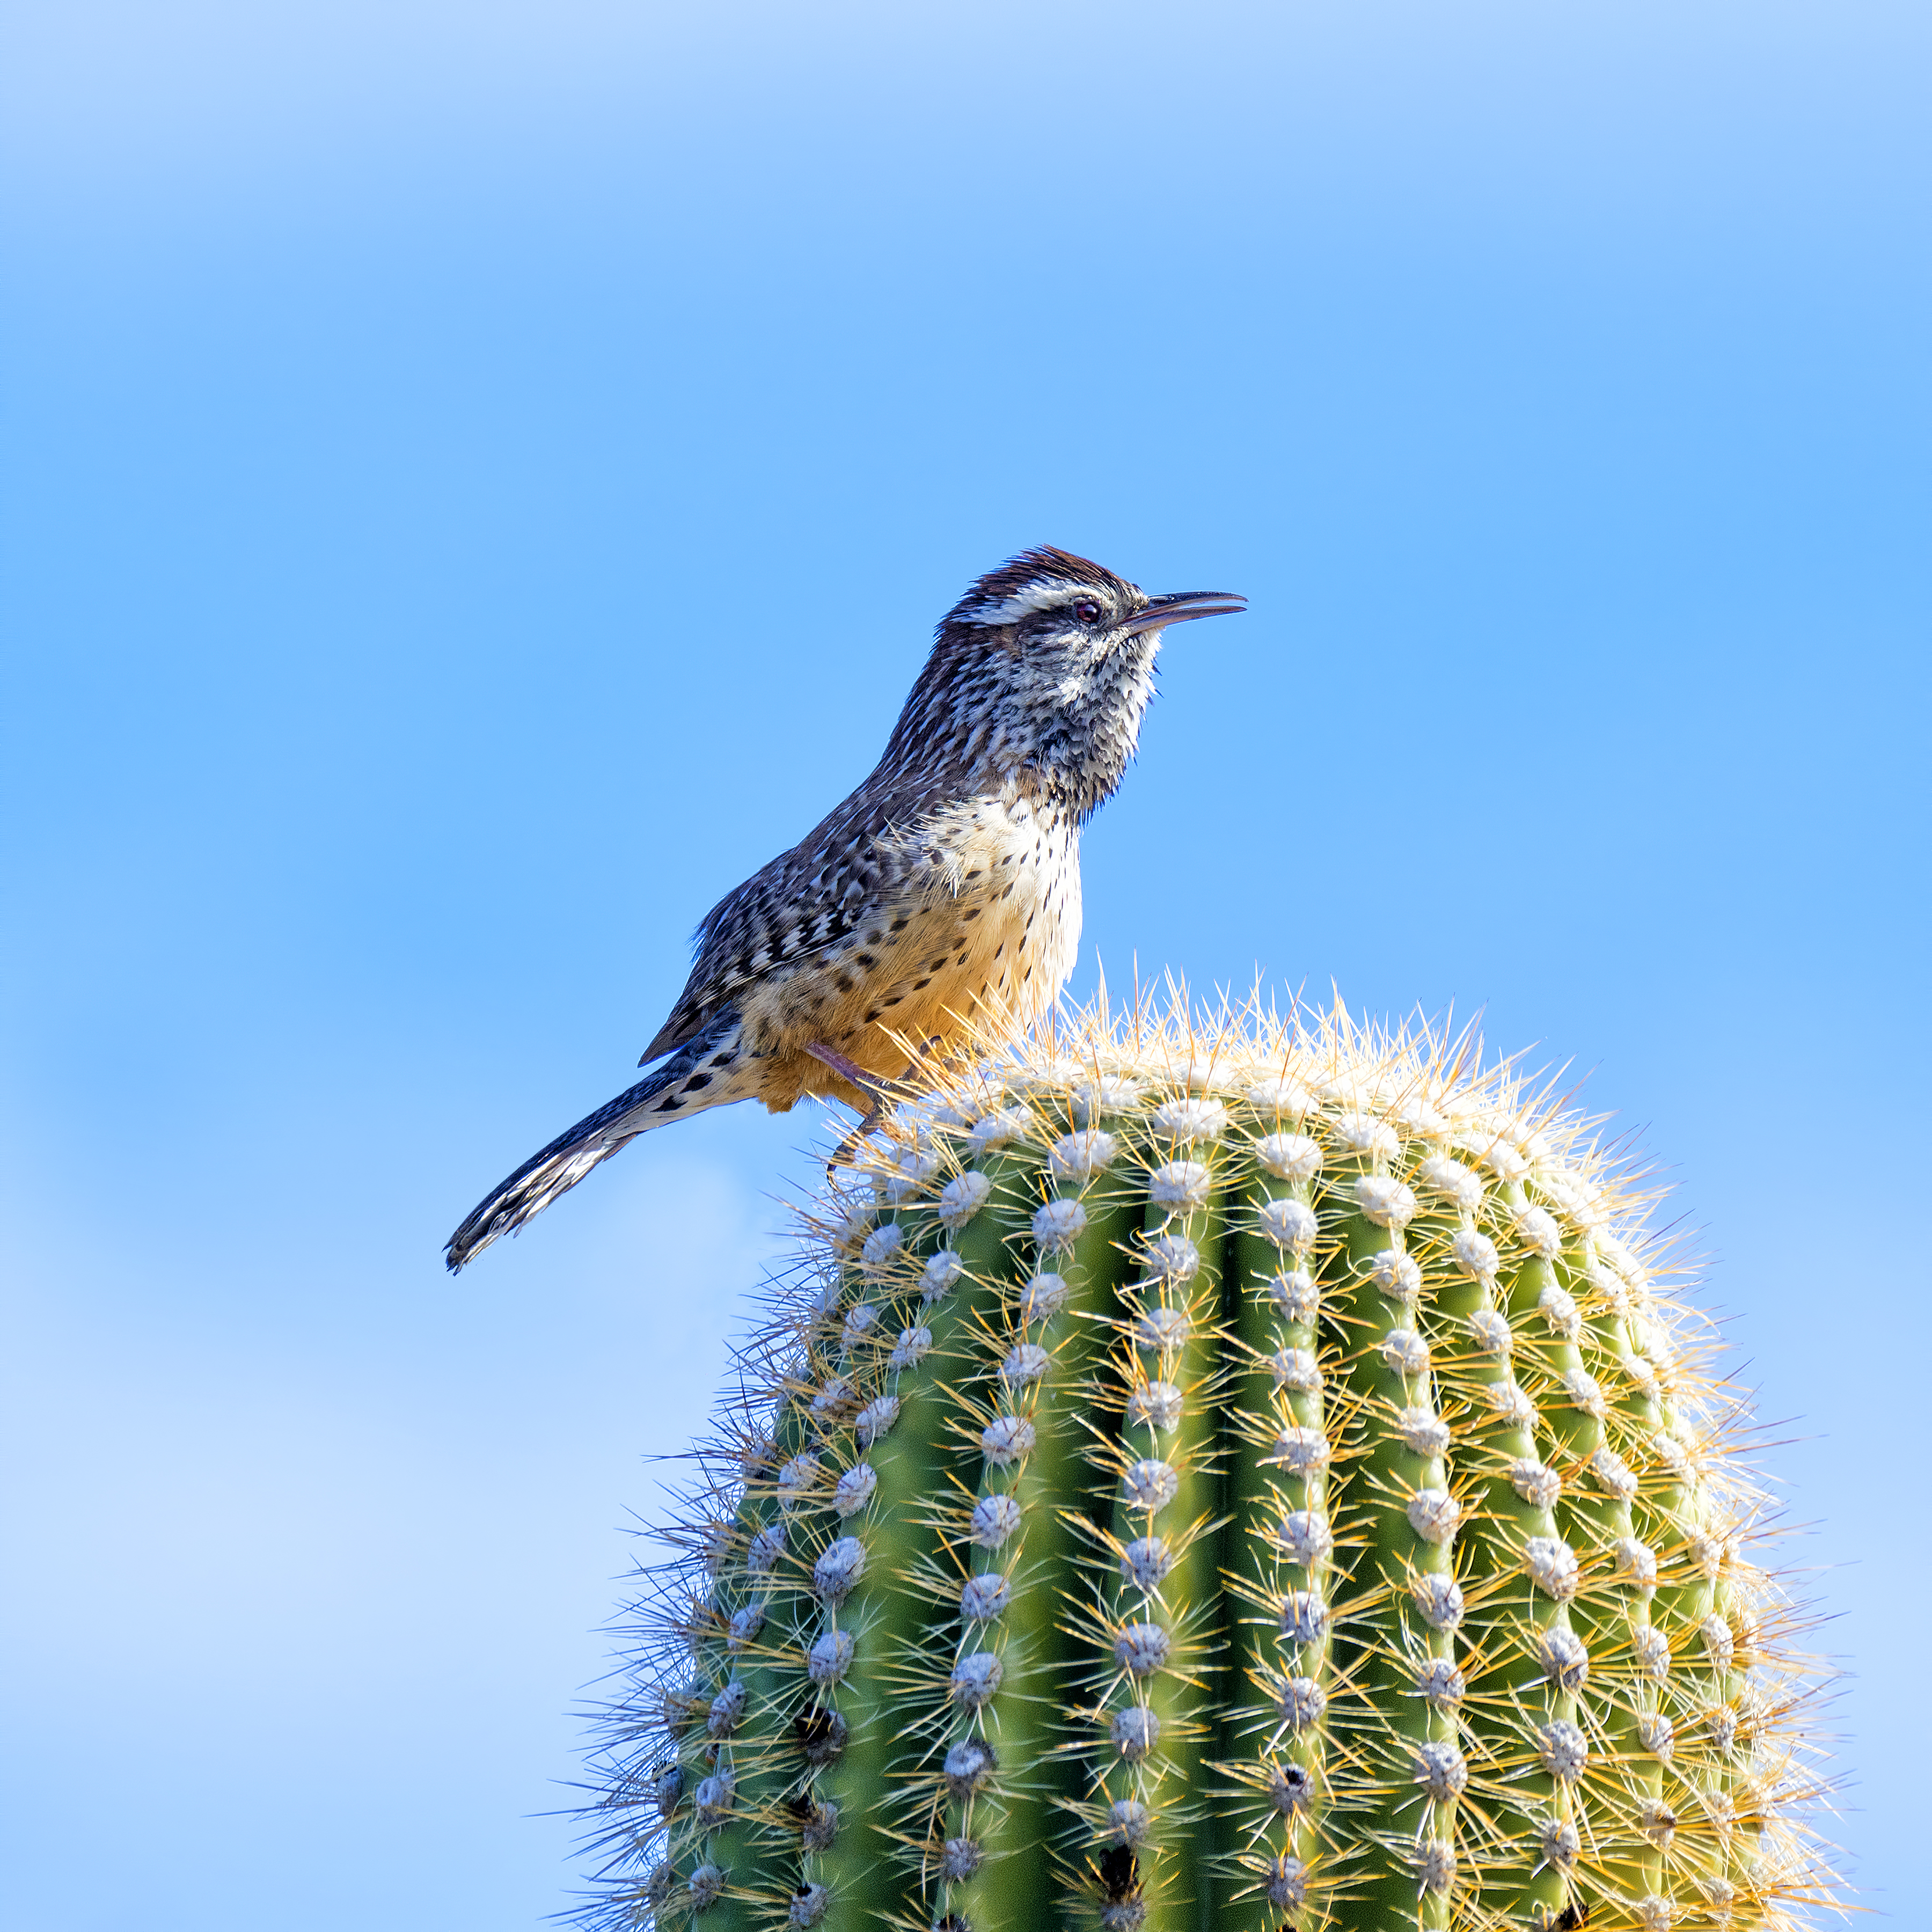 CACTUS WREN - I found this little guy hanging out in Saguaro Nation Park near Tucson, Arizona.